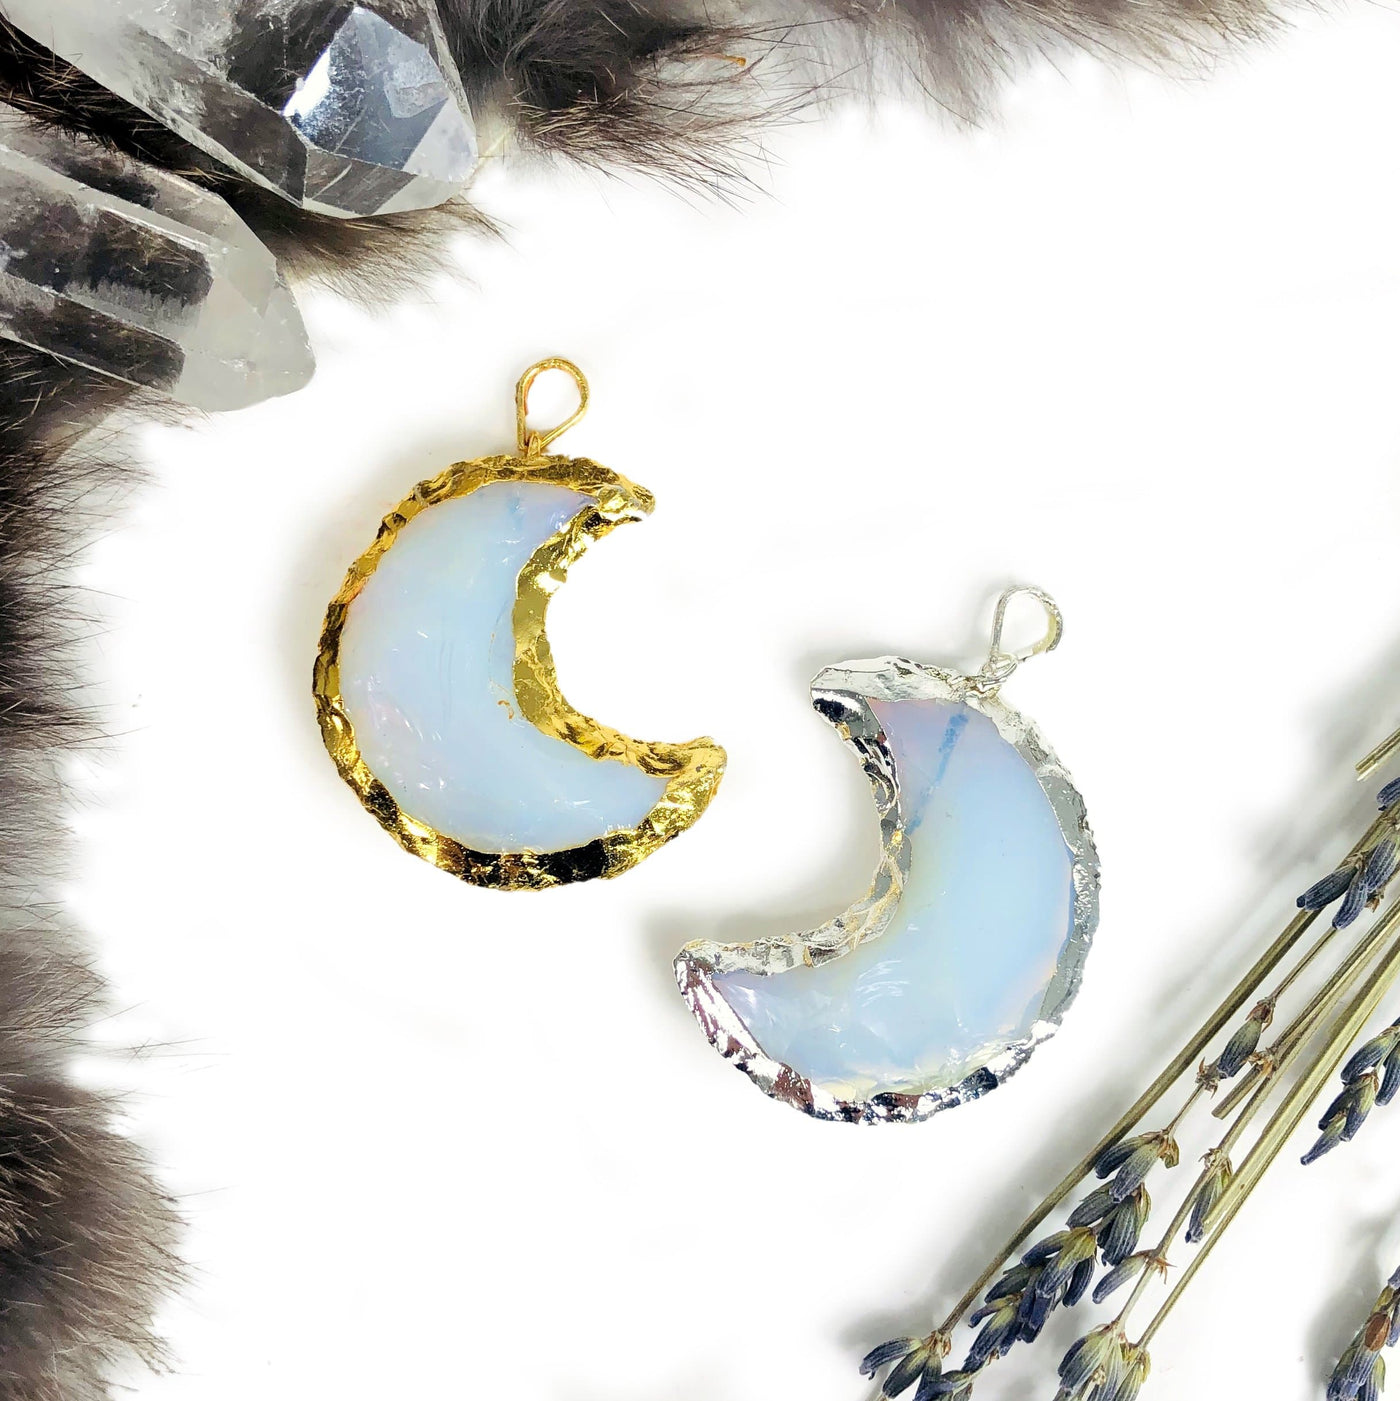 opalite pendants available in electroplated gold or silver